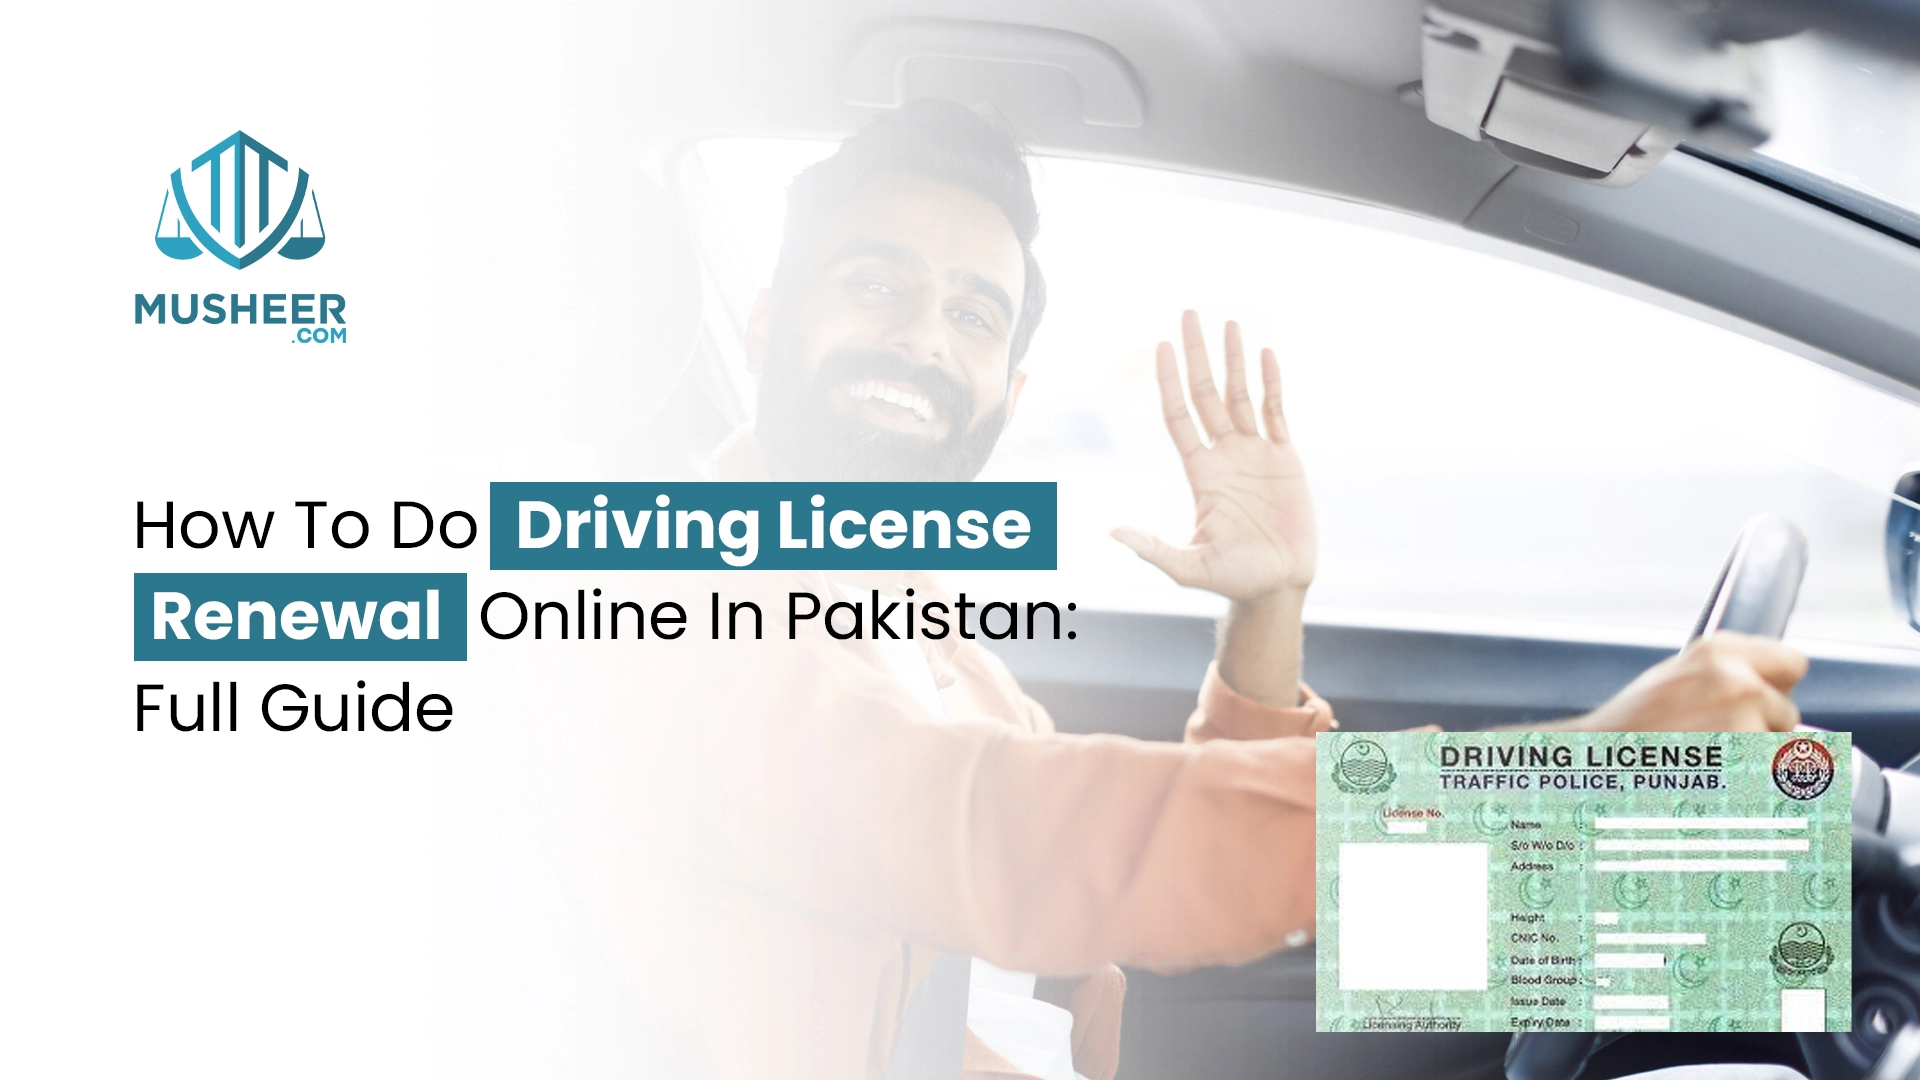 How To Do Driving License Renewal Online In Pakistan